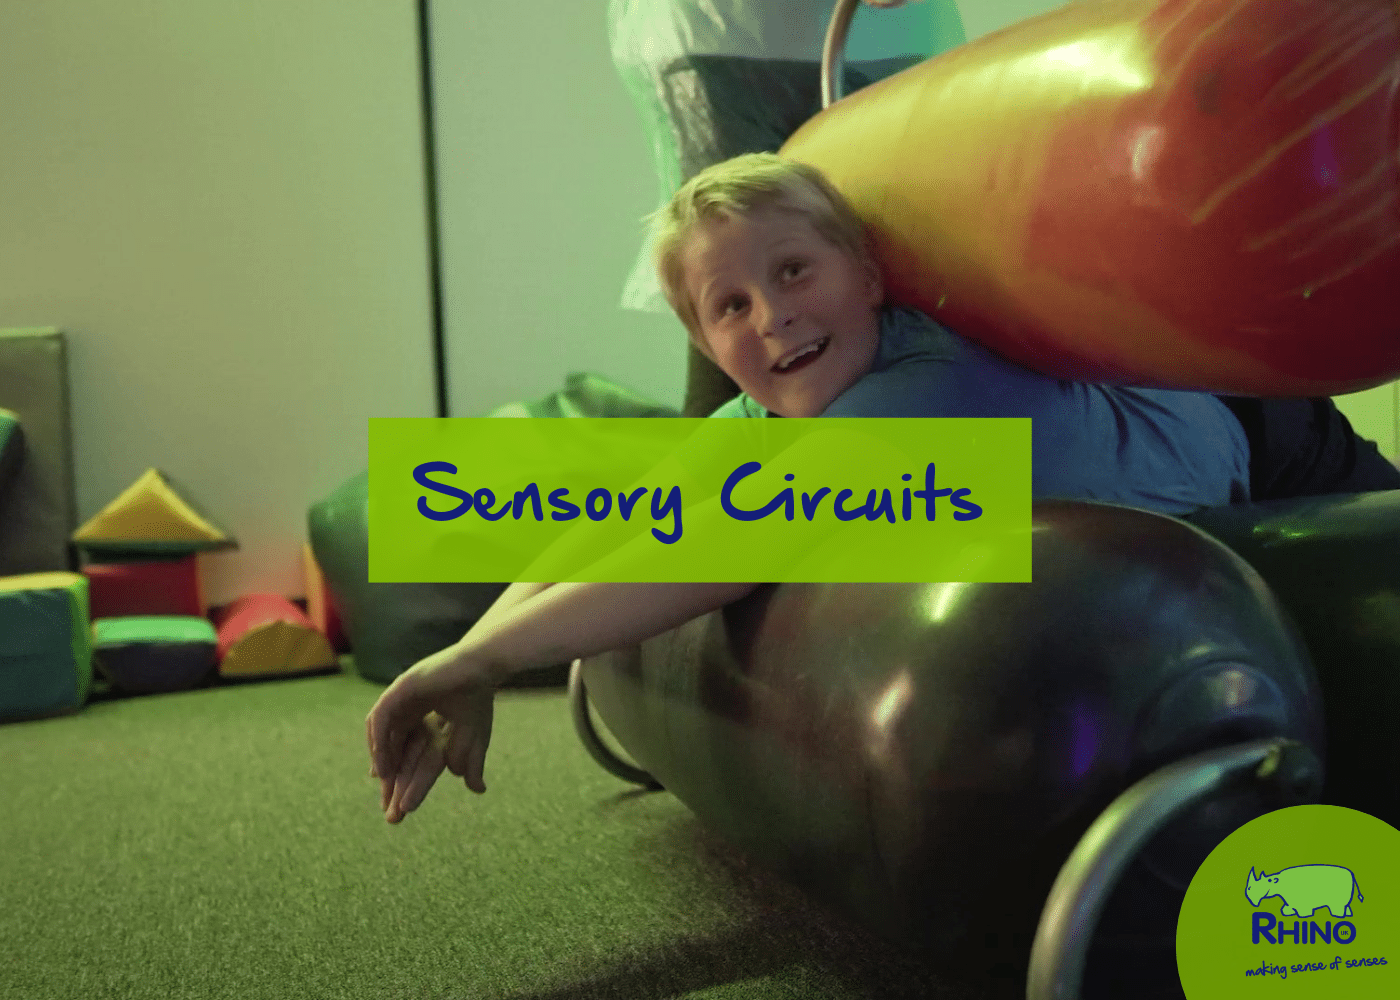 Sensory Circuits, What They Are, And How You Can Make Your Own